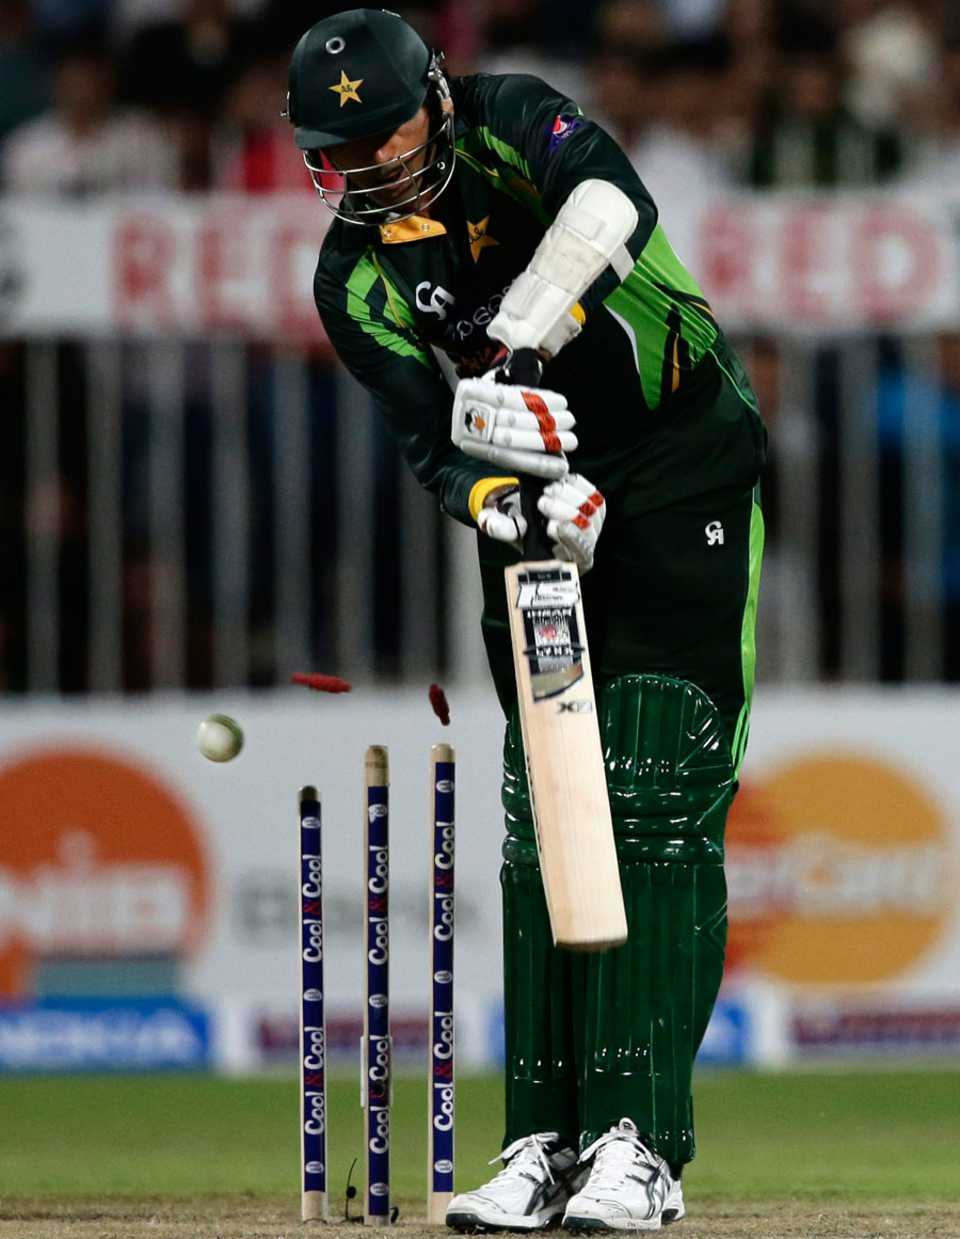 Mohammad Irfan was the last wicket to fall 